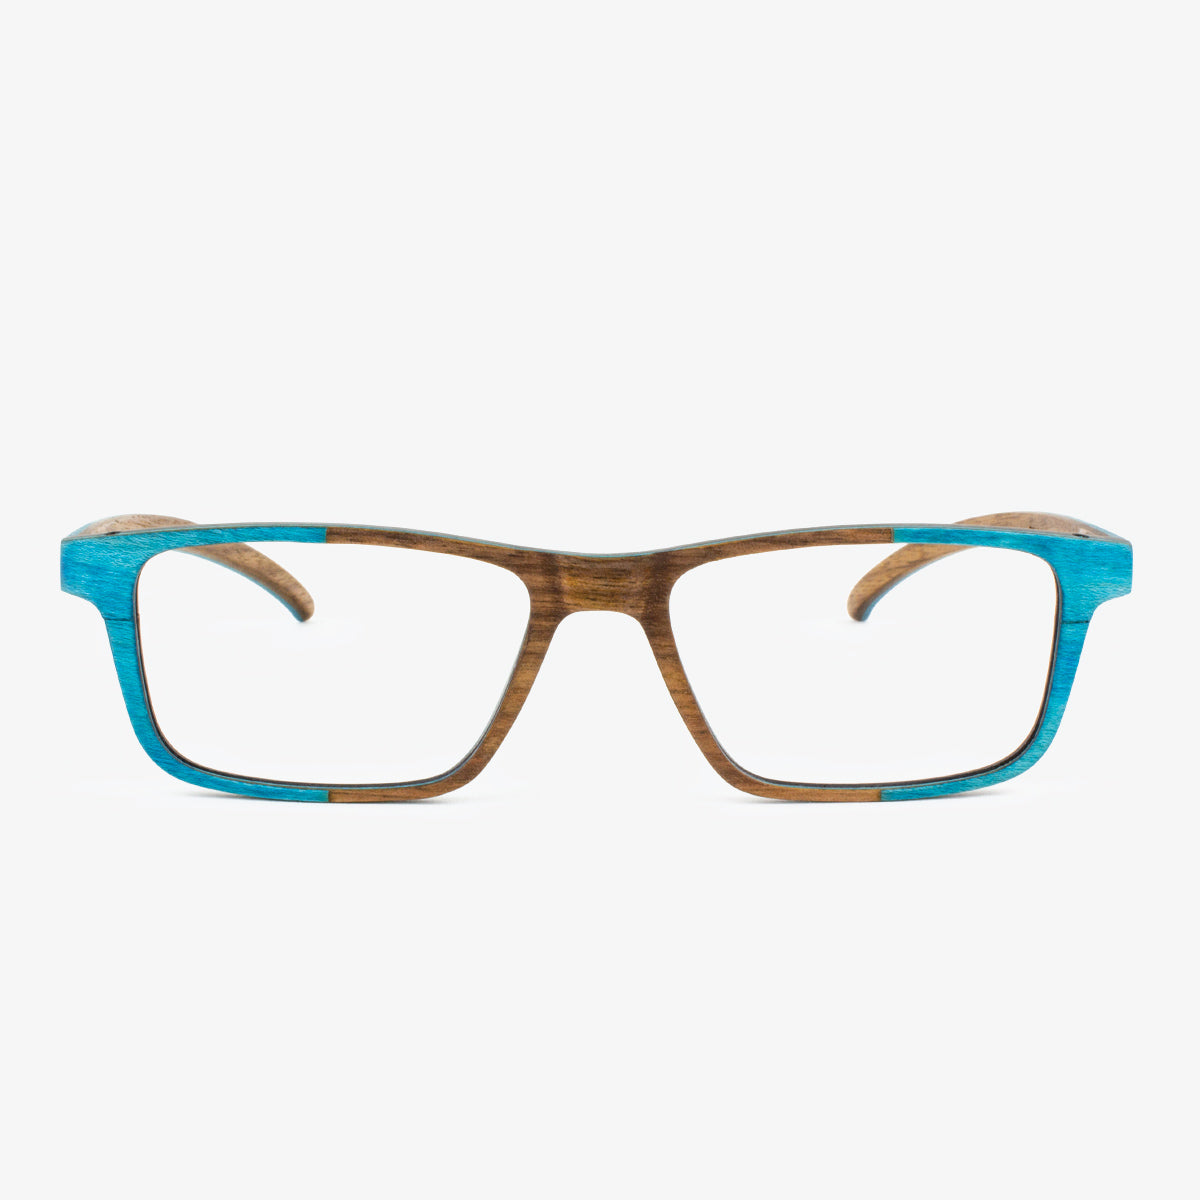 Handcrafted Turquoise and walnut Wooden eyeglass frames